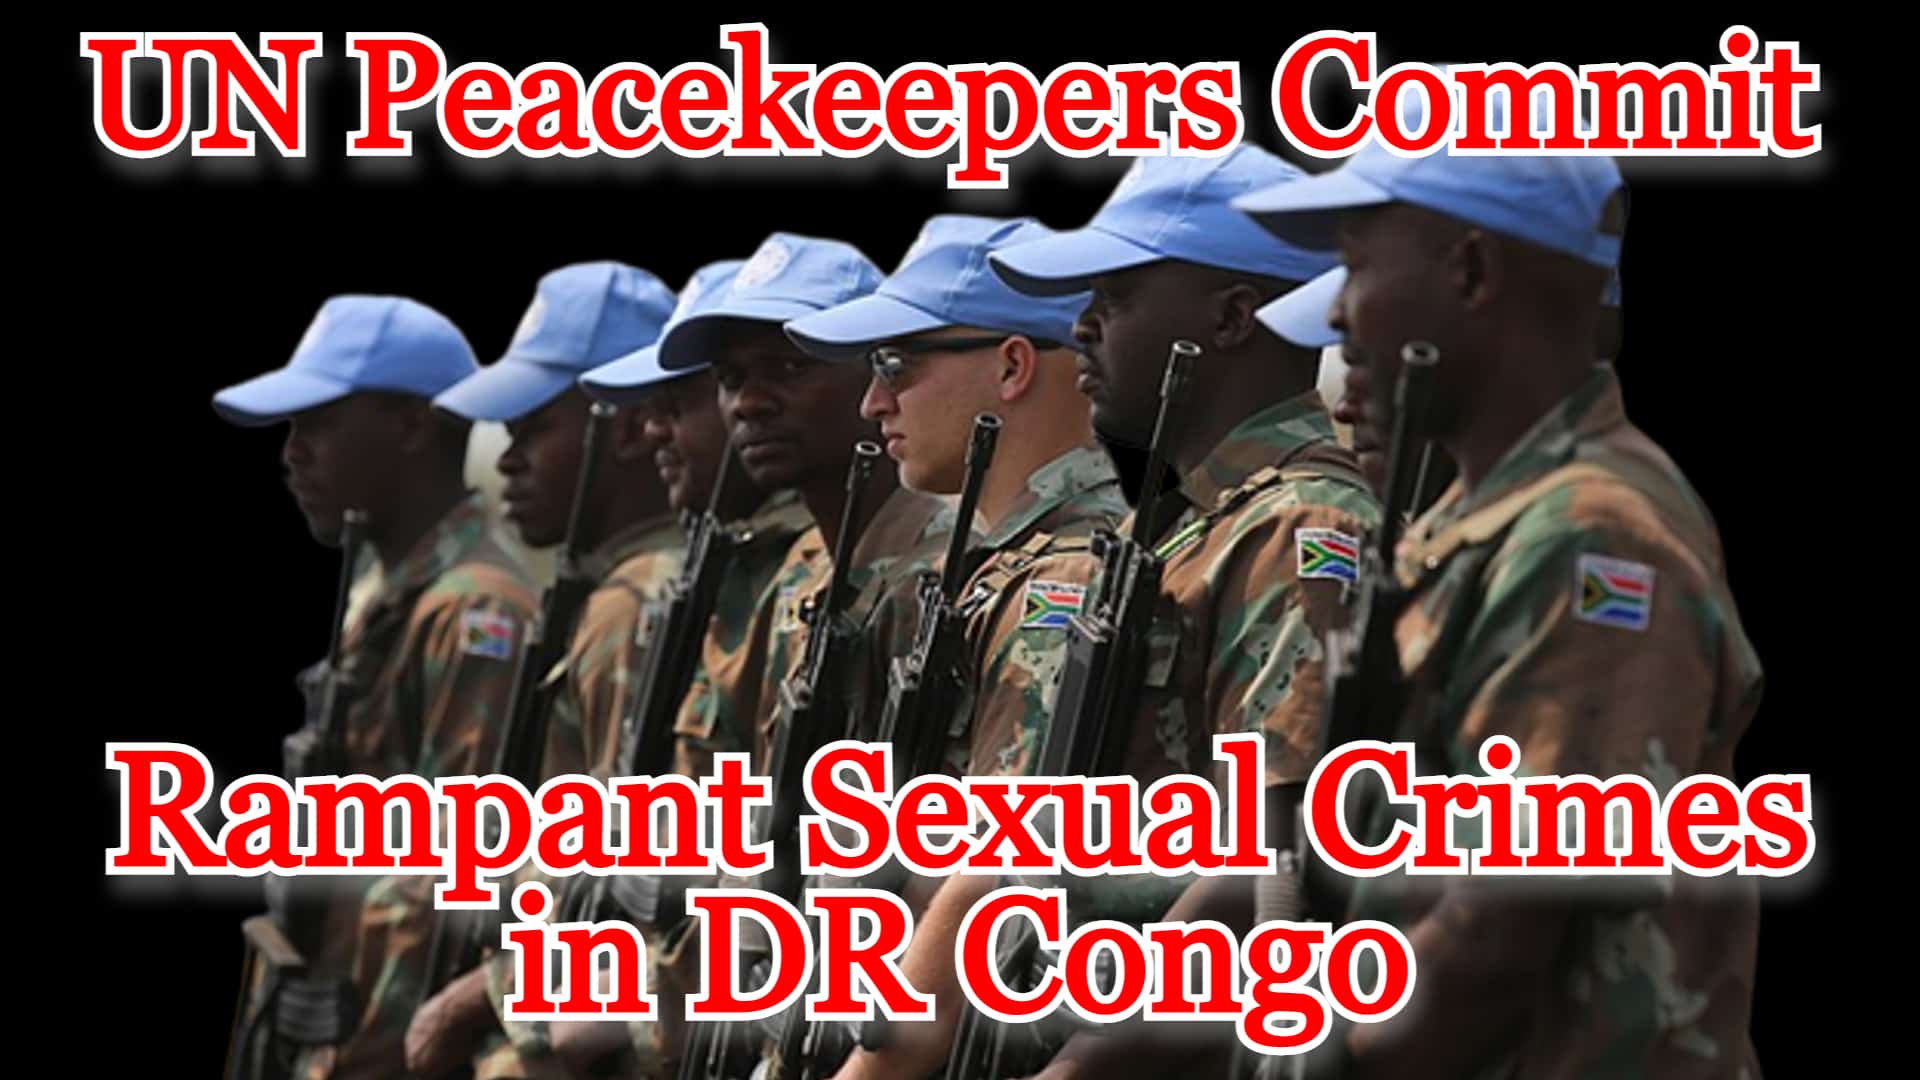 COI #312: UN Peacekeepers Commit Rampant Sexual Crimes in DR Congo